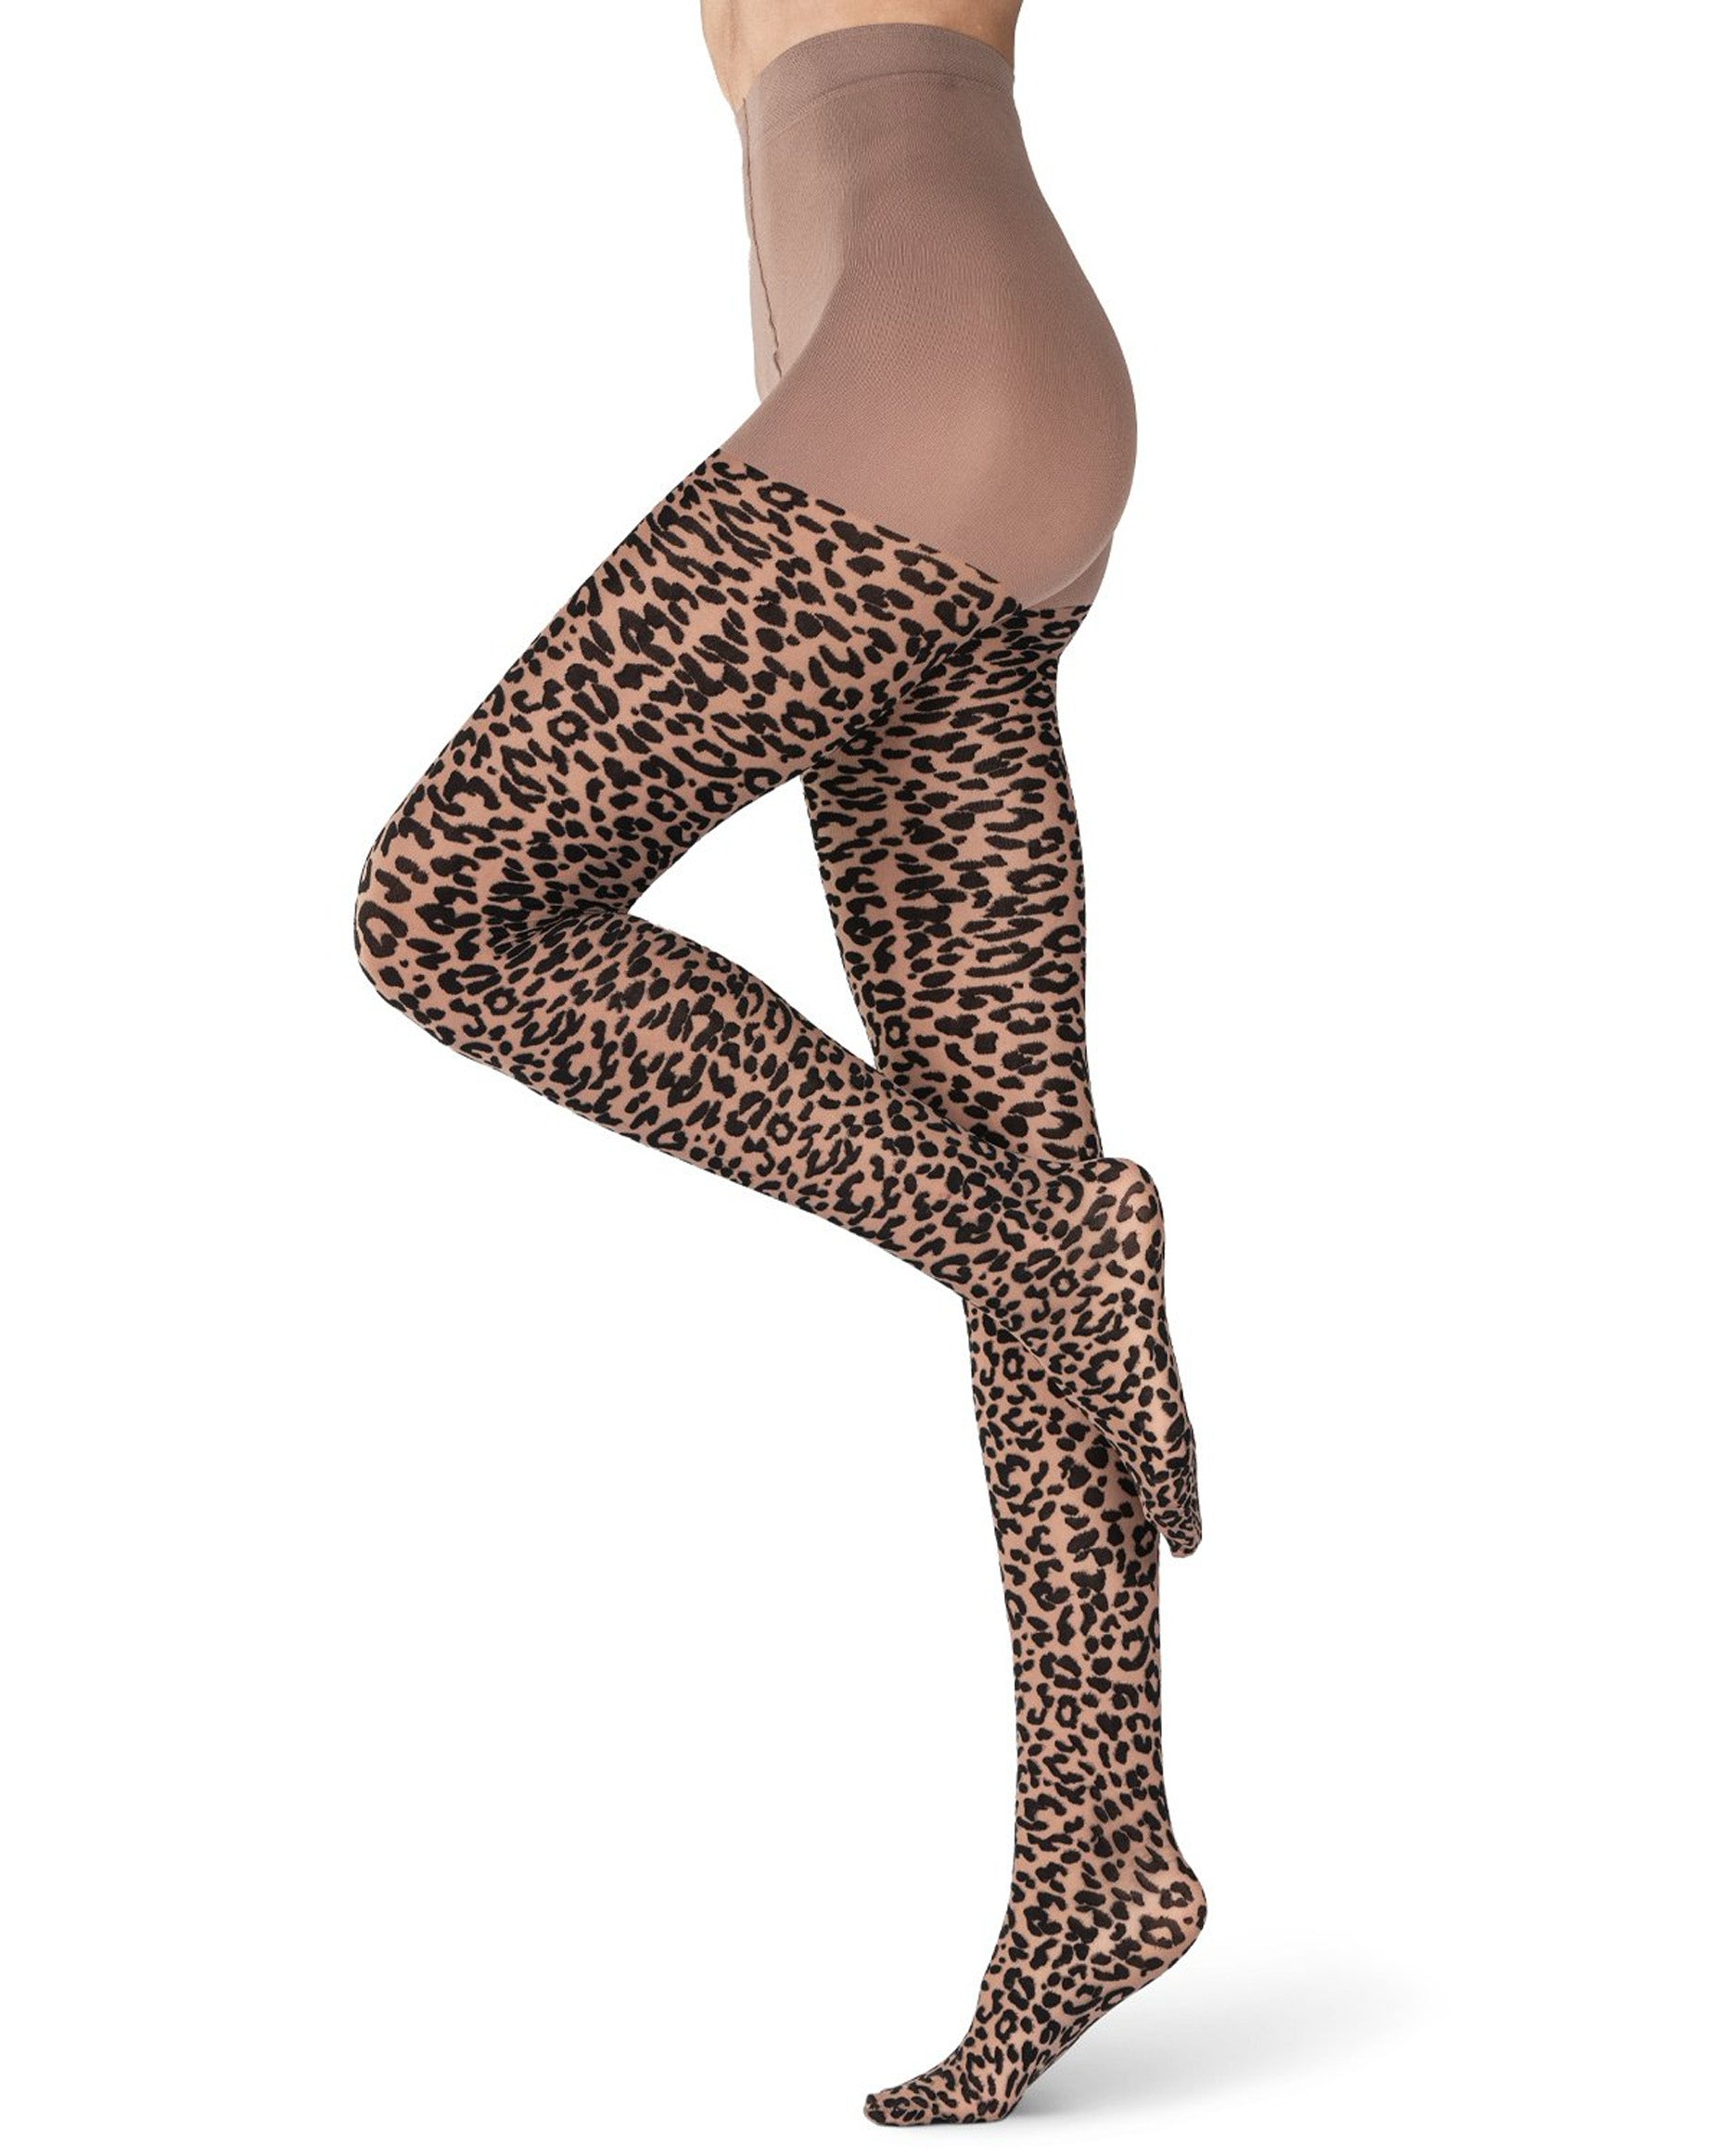 Emilio Cavallini Leopard Tights - sheer nude fashion tights with a black opaque animal print pattern